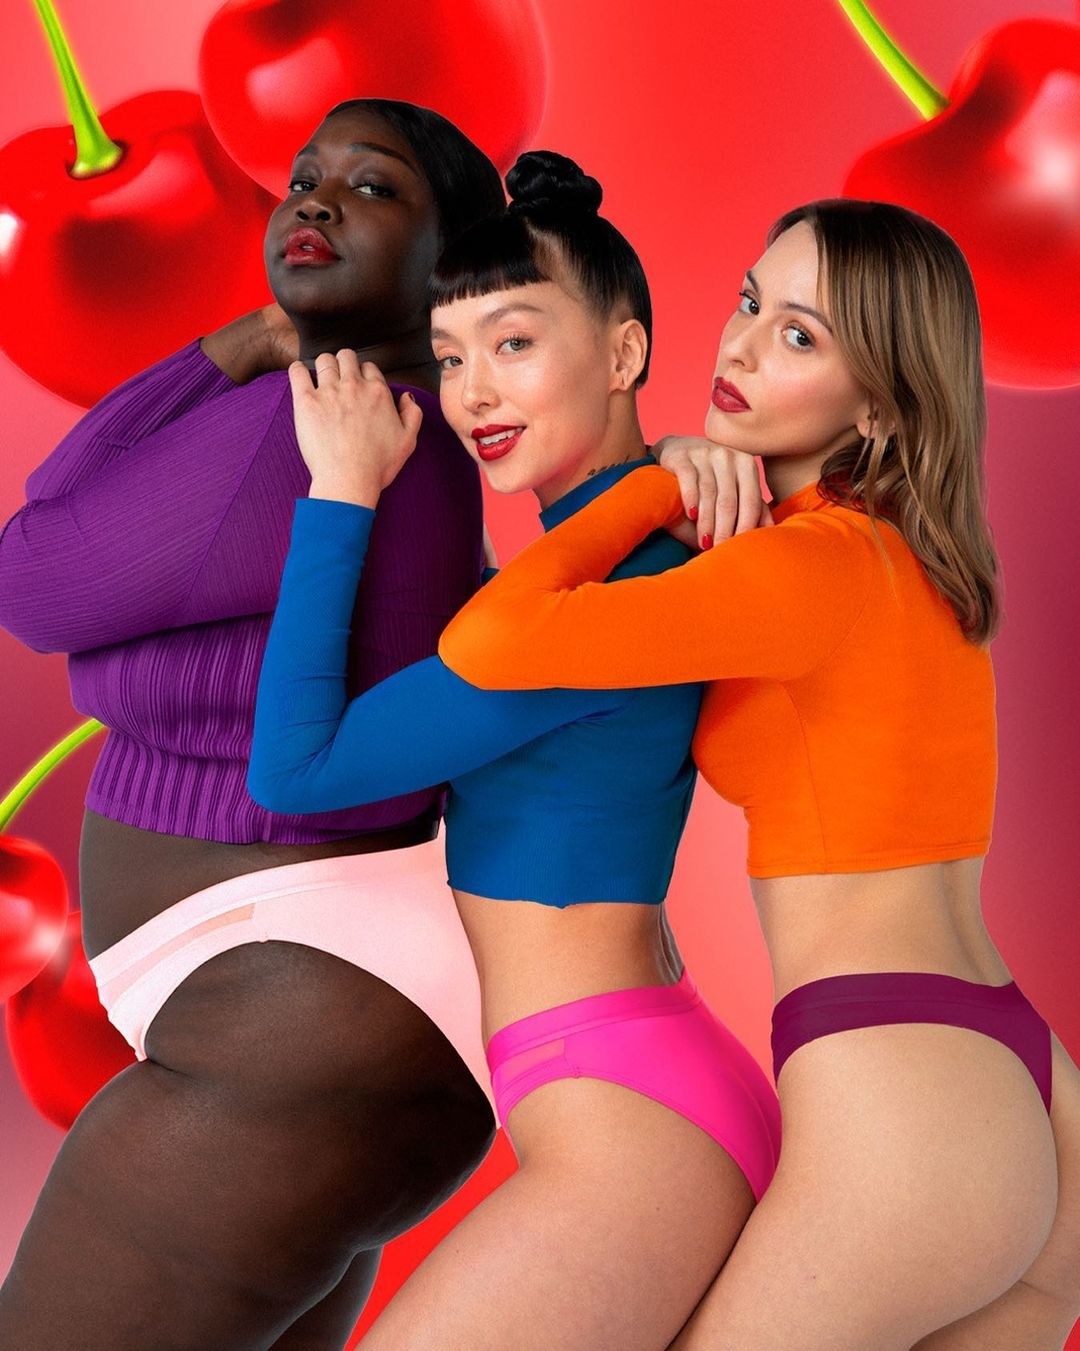 models wearing light pink, hot pink, and red underwear